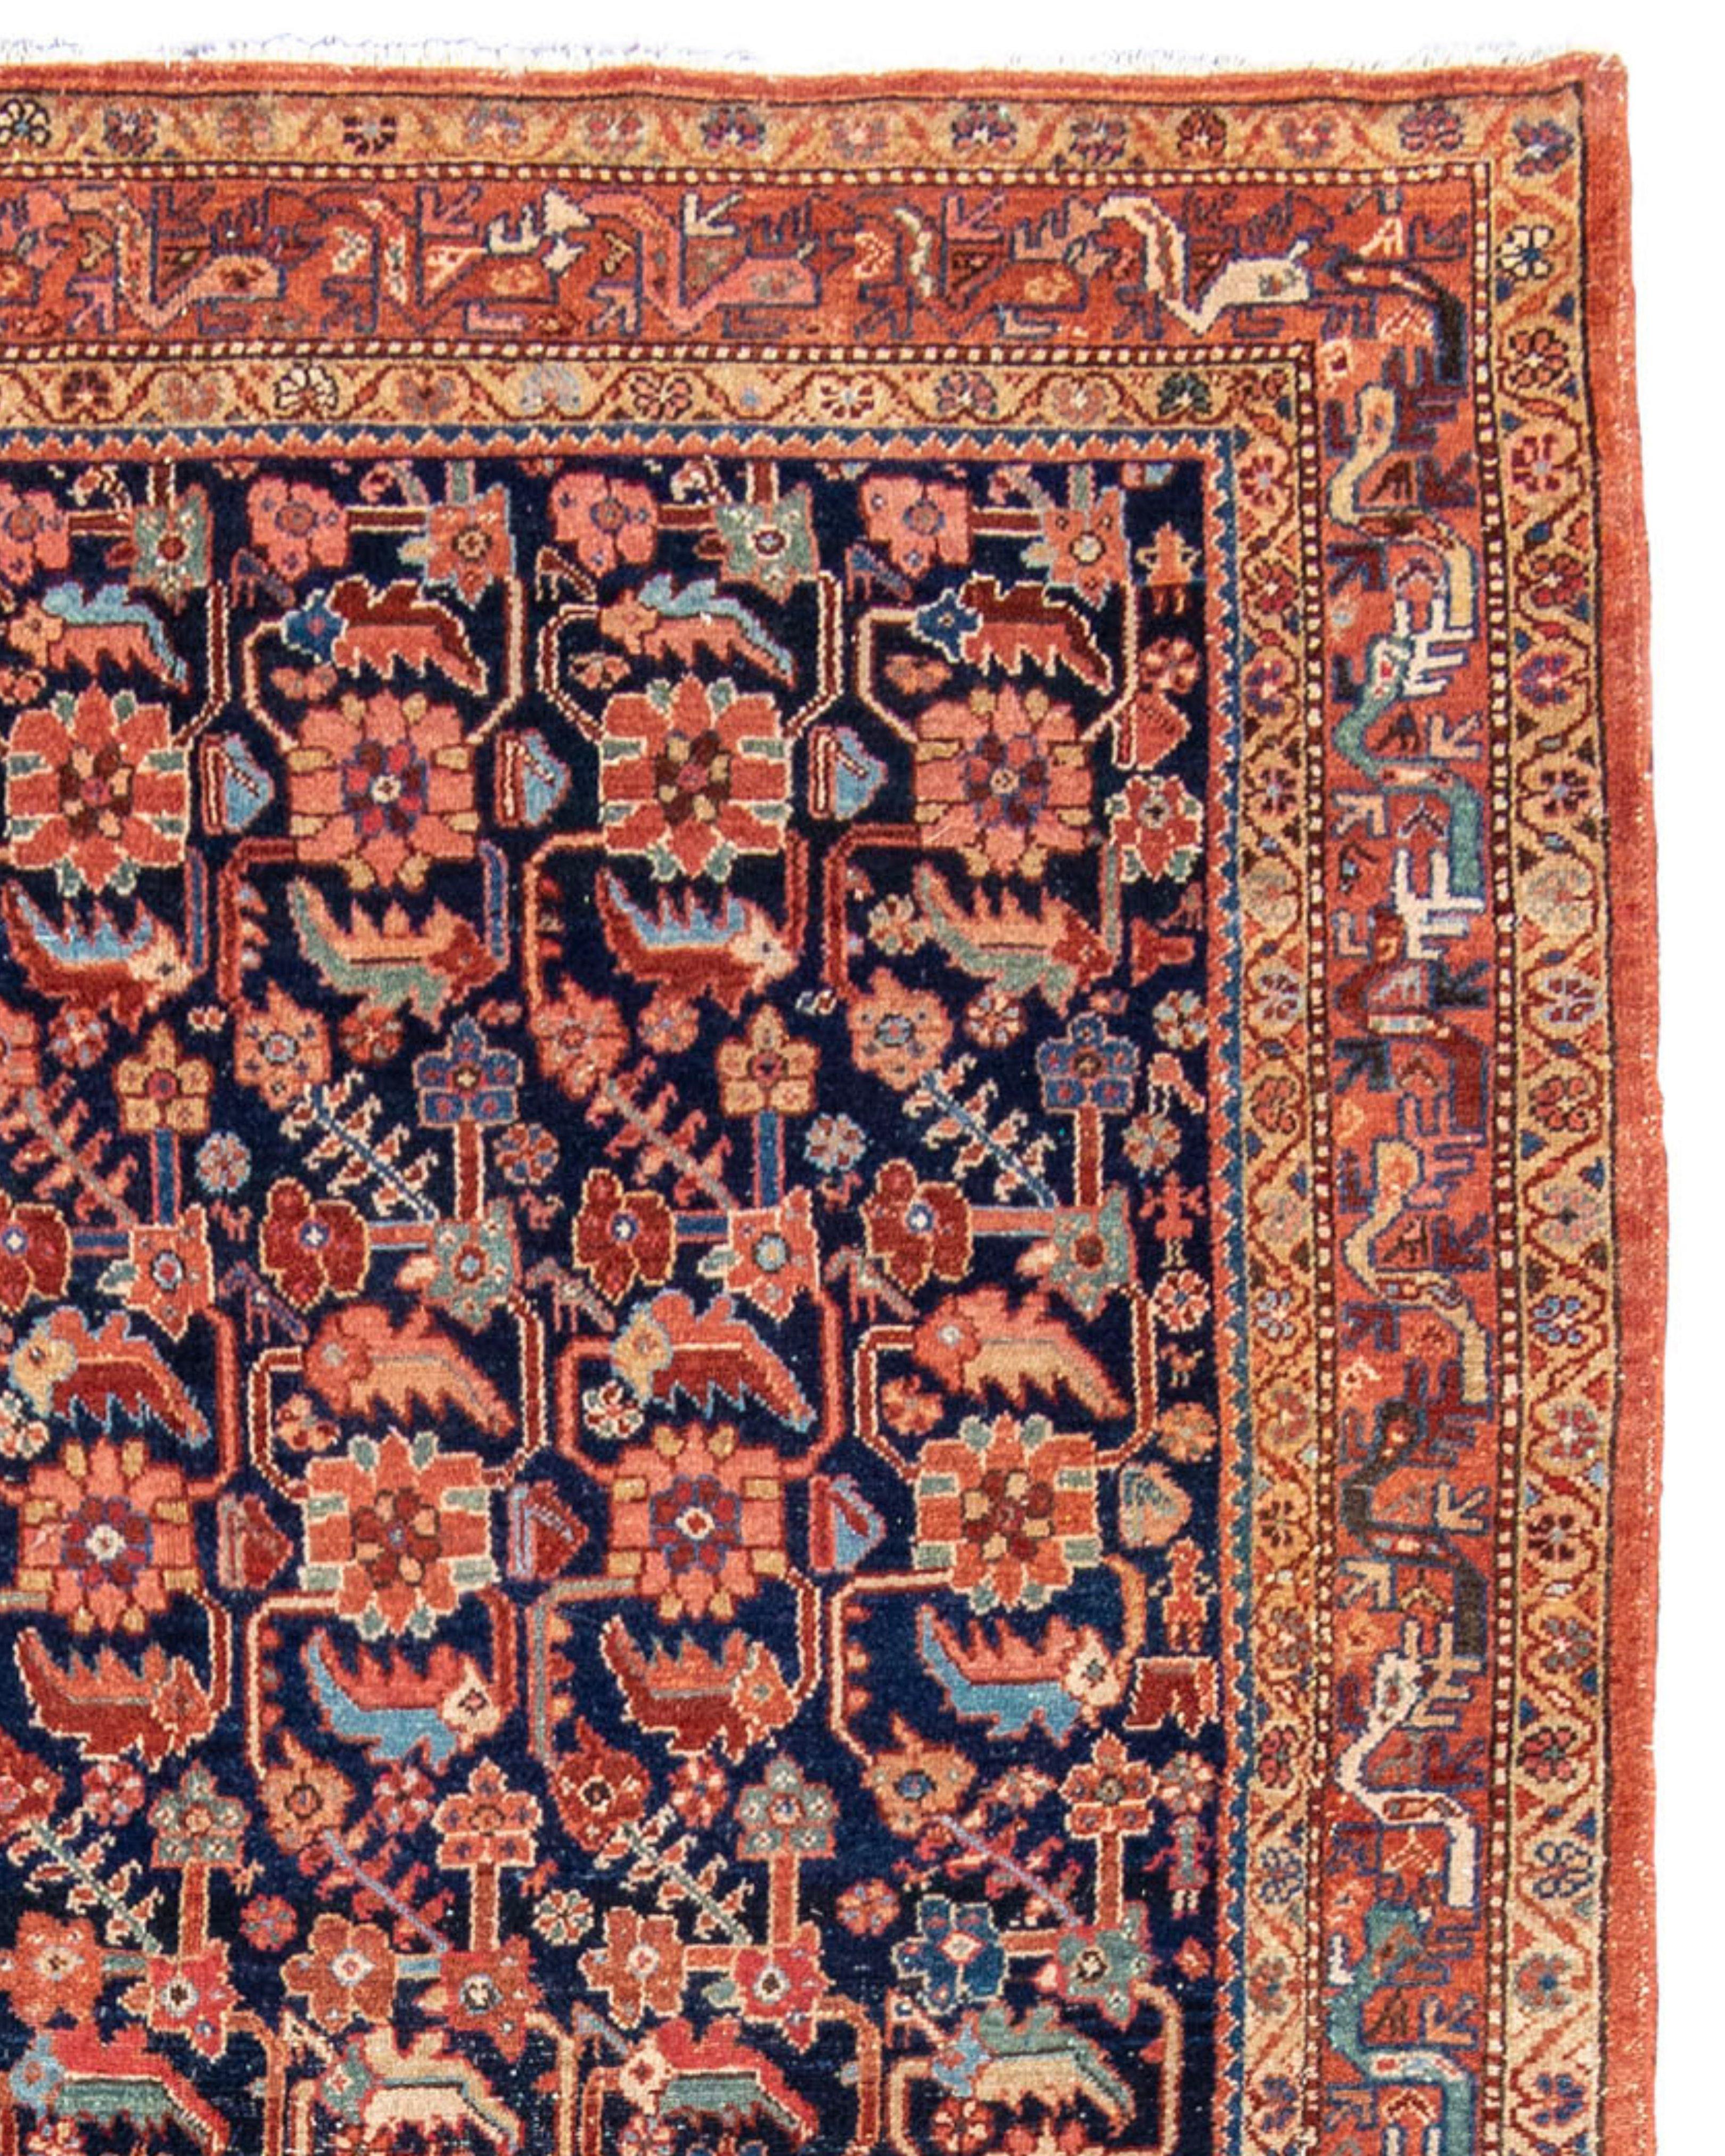 Antique Persian Malayer Long Rug, c. 1900

Additional Information:
Dimensions: 6'5